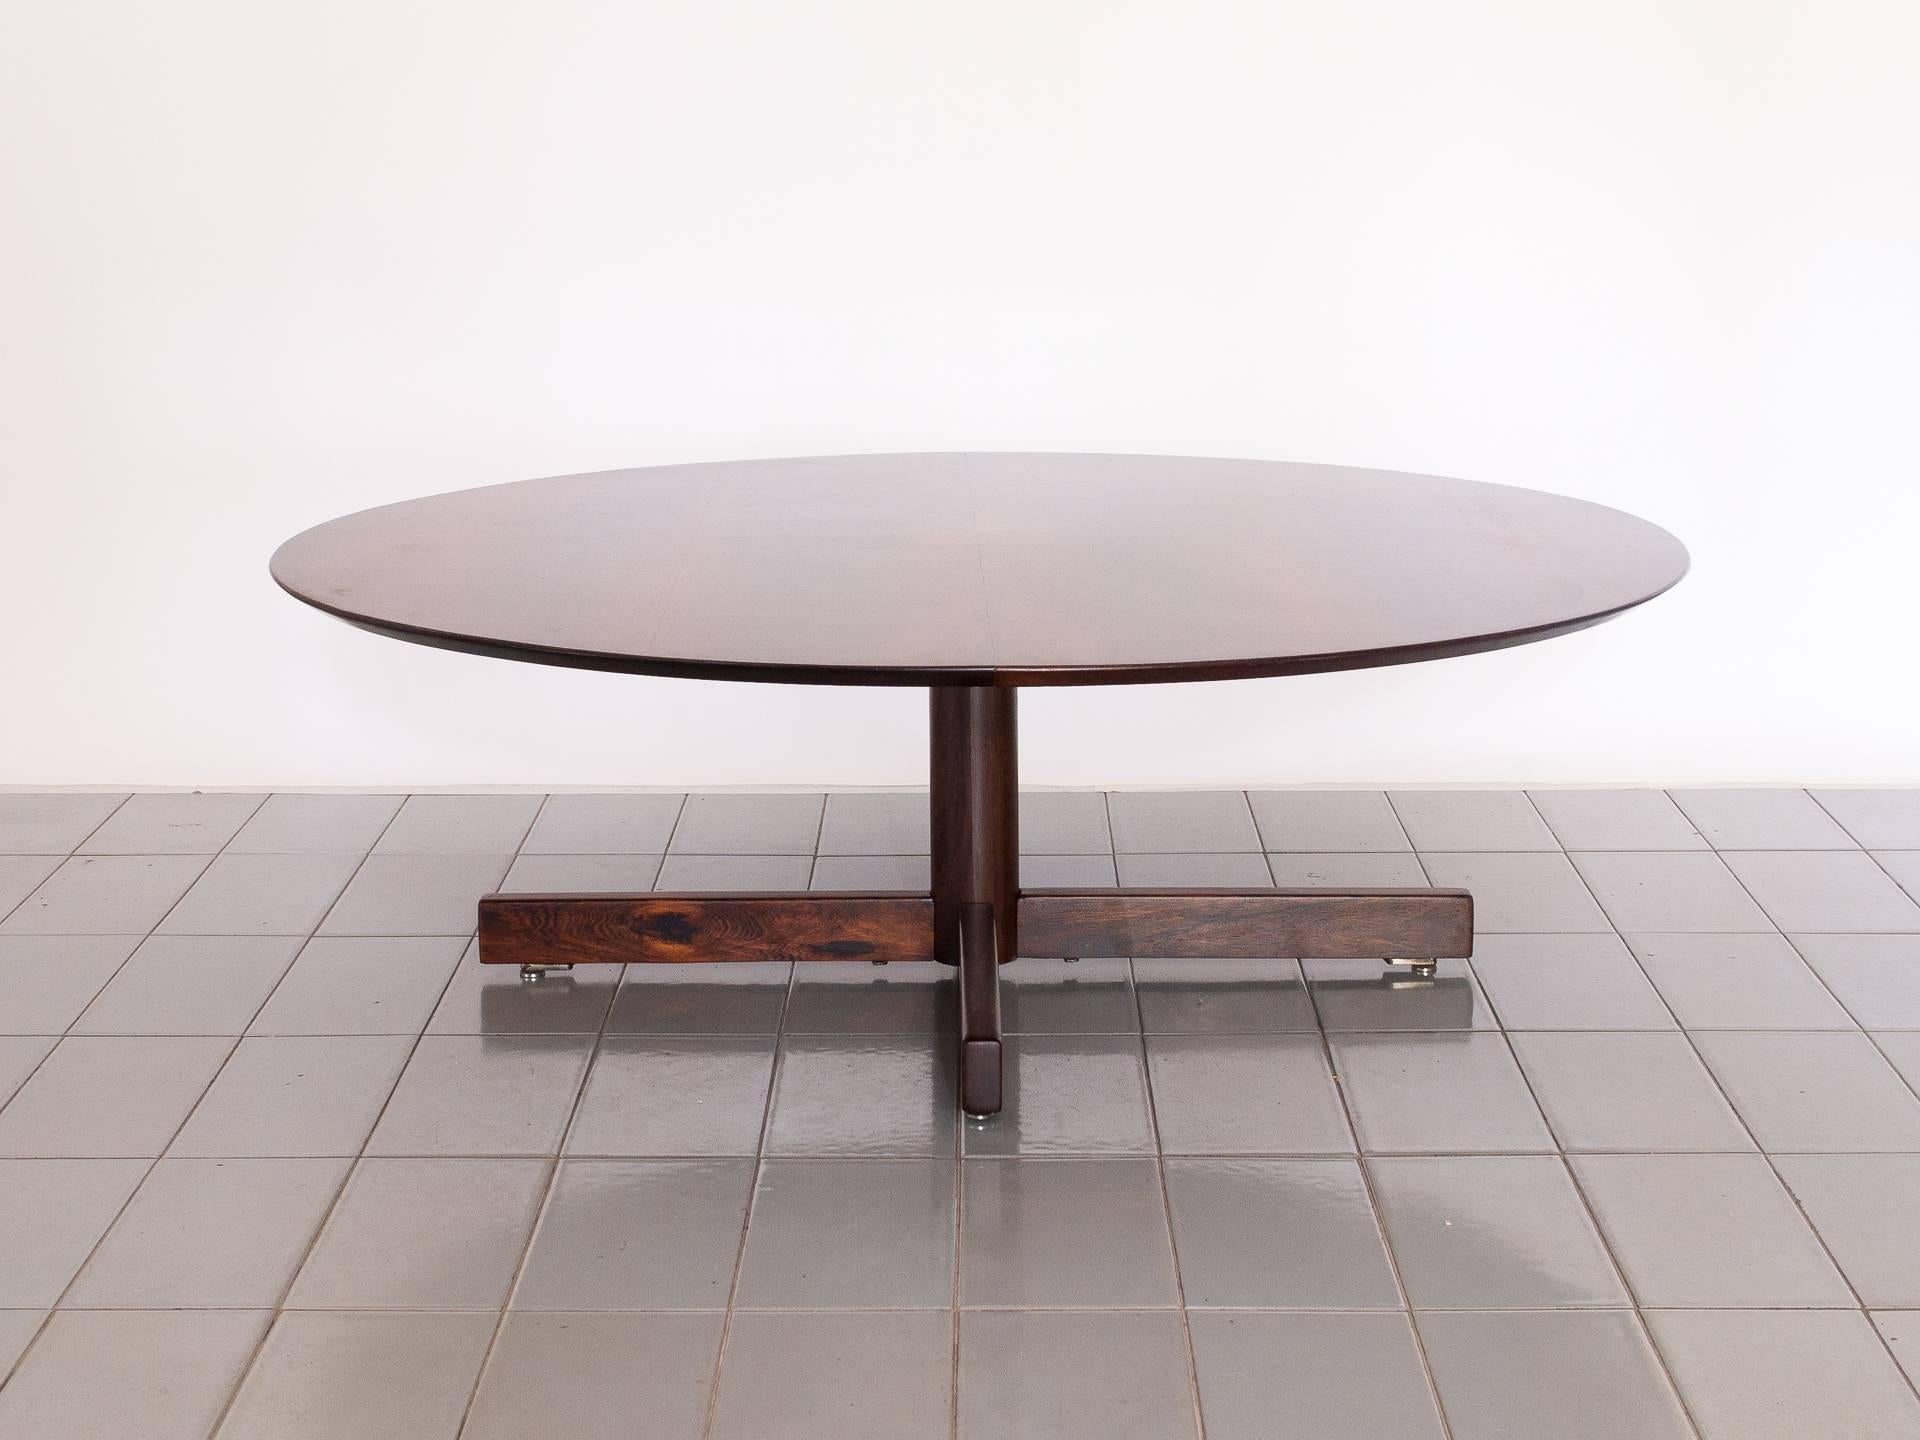 This beautiful round coffee table was designed by Jorge Zalszupin and produced by L'Atelier in the early 1960s. The tabletop has solid rosewood edges, and is veneered in rosewood. The legs are made of solid rosewood.

The piece has been fully